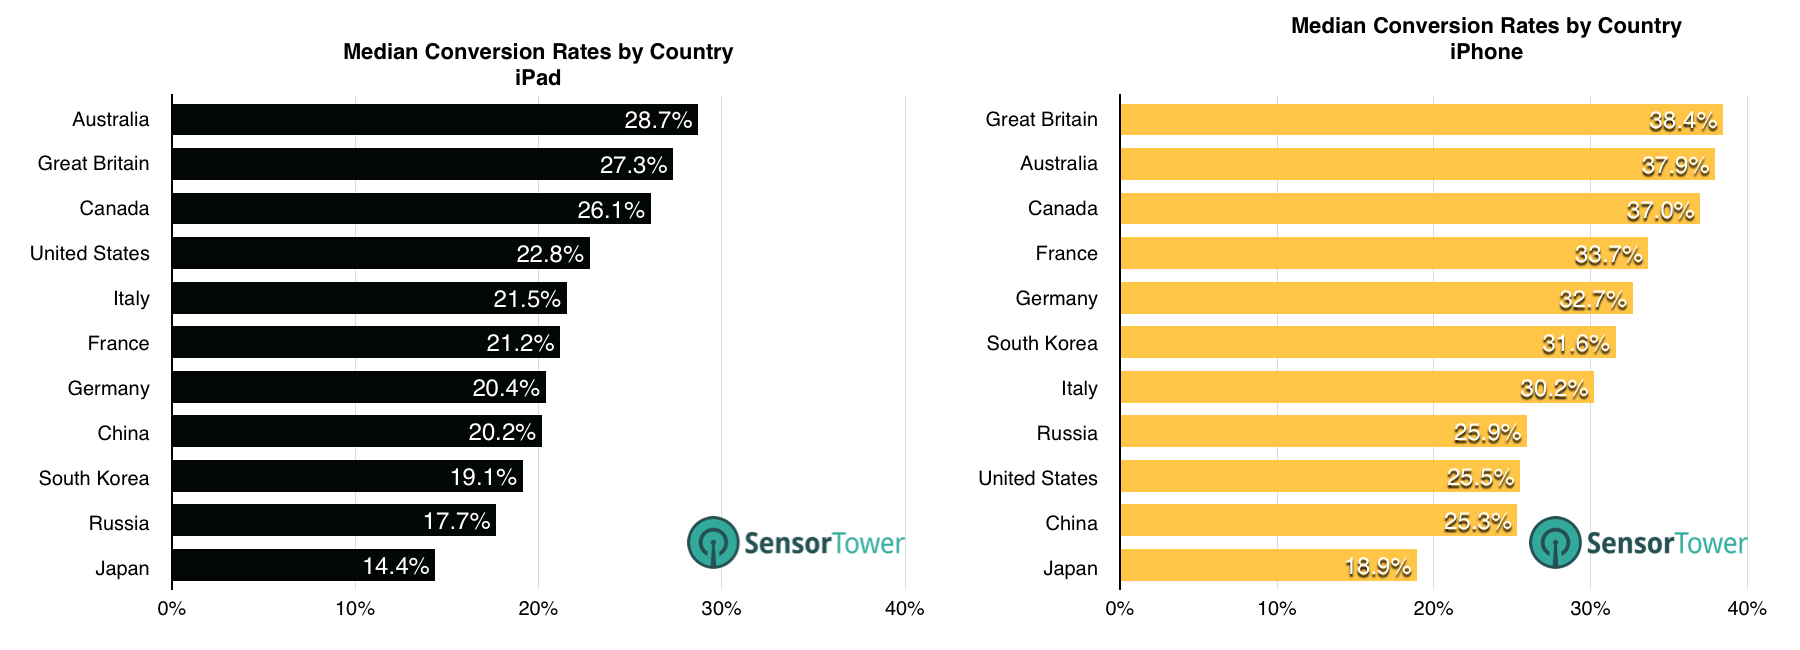 lt="Graphs Showing Top 10 Countries' Conversion Rates